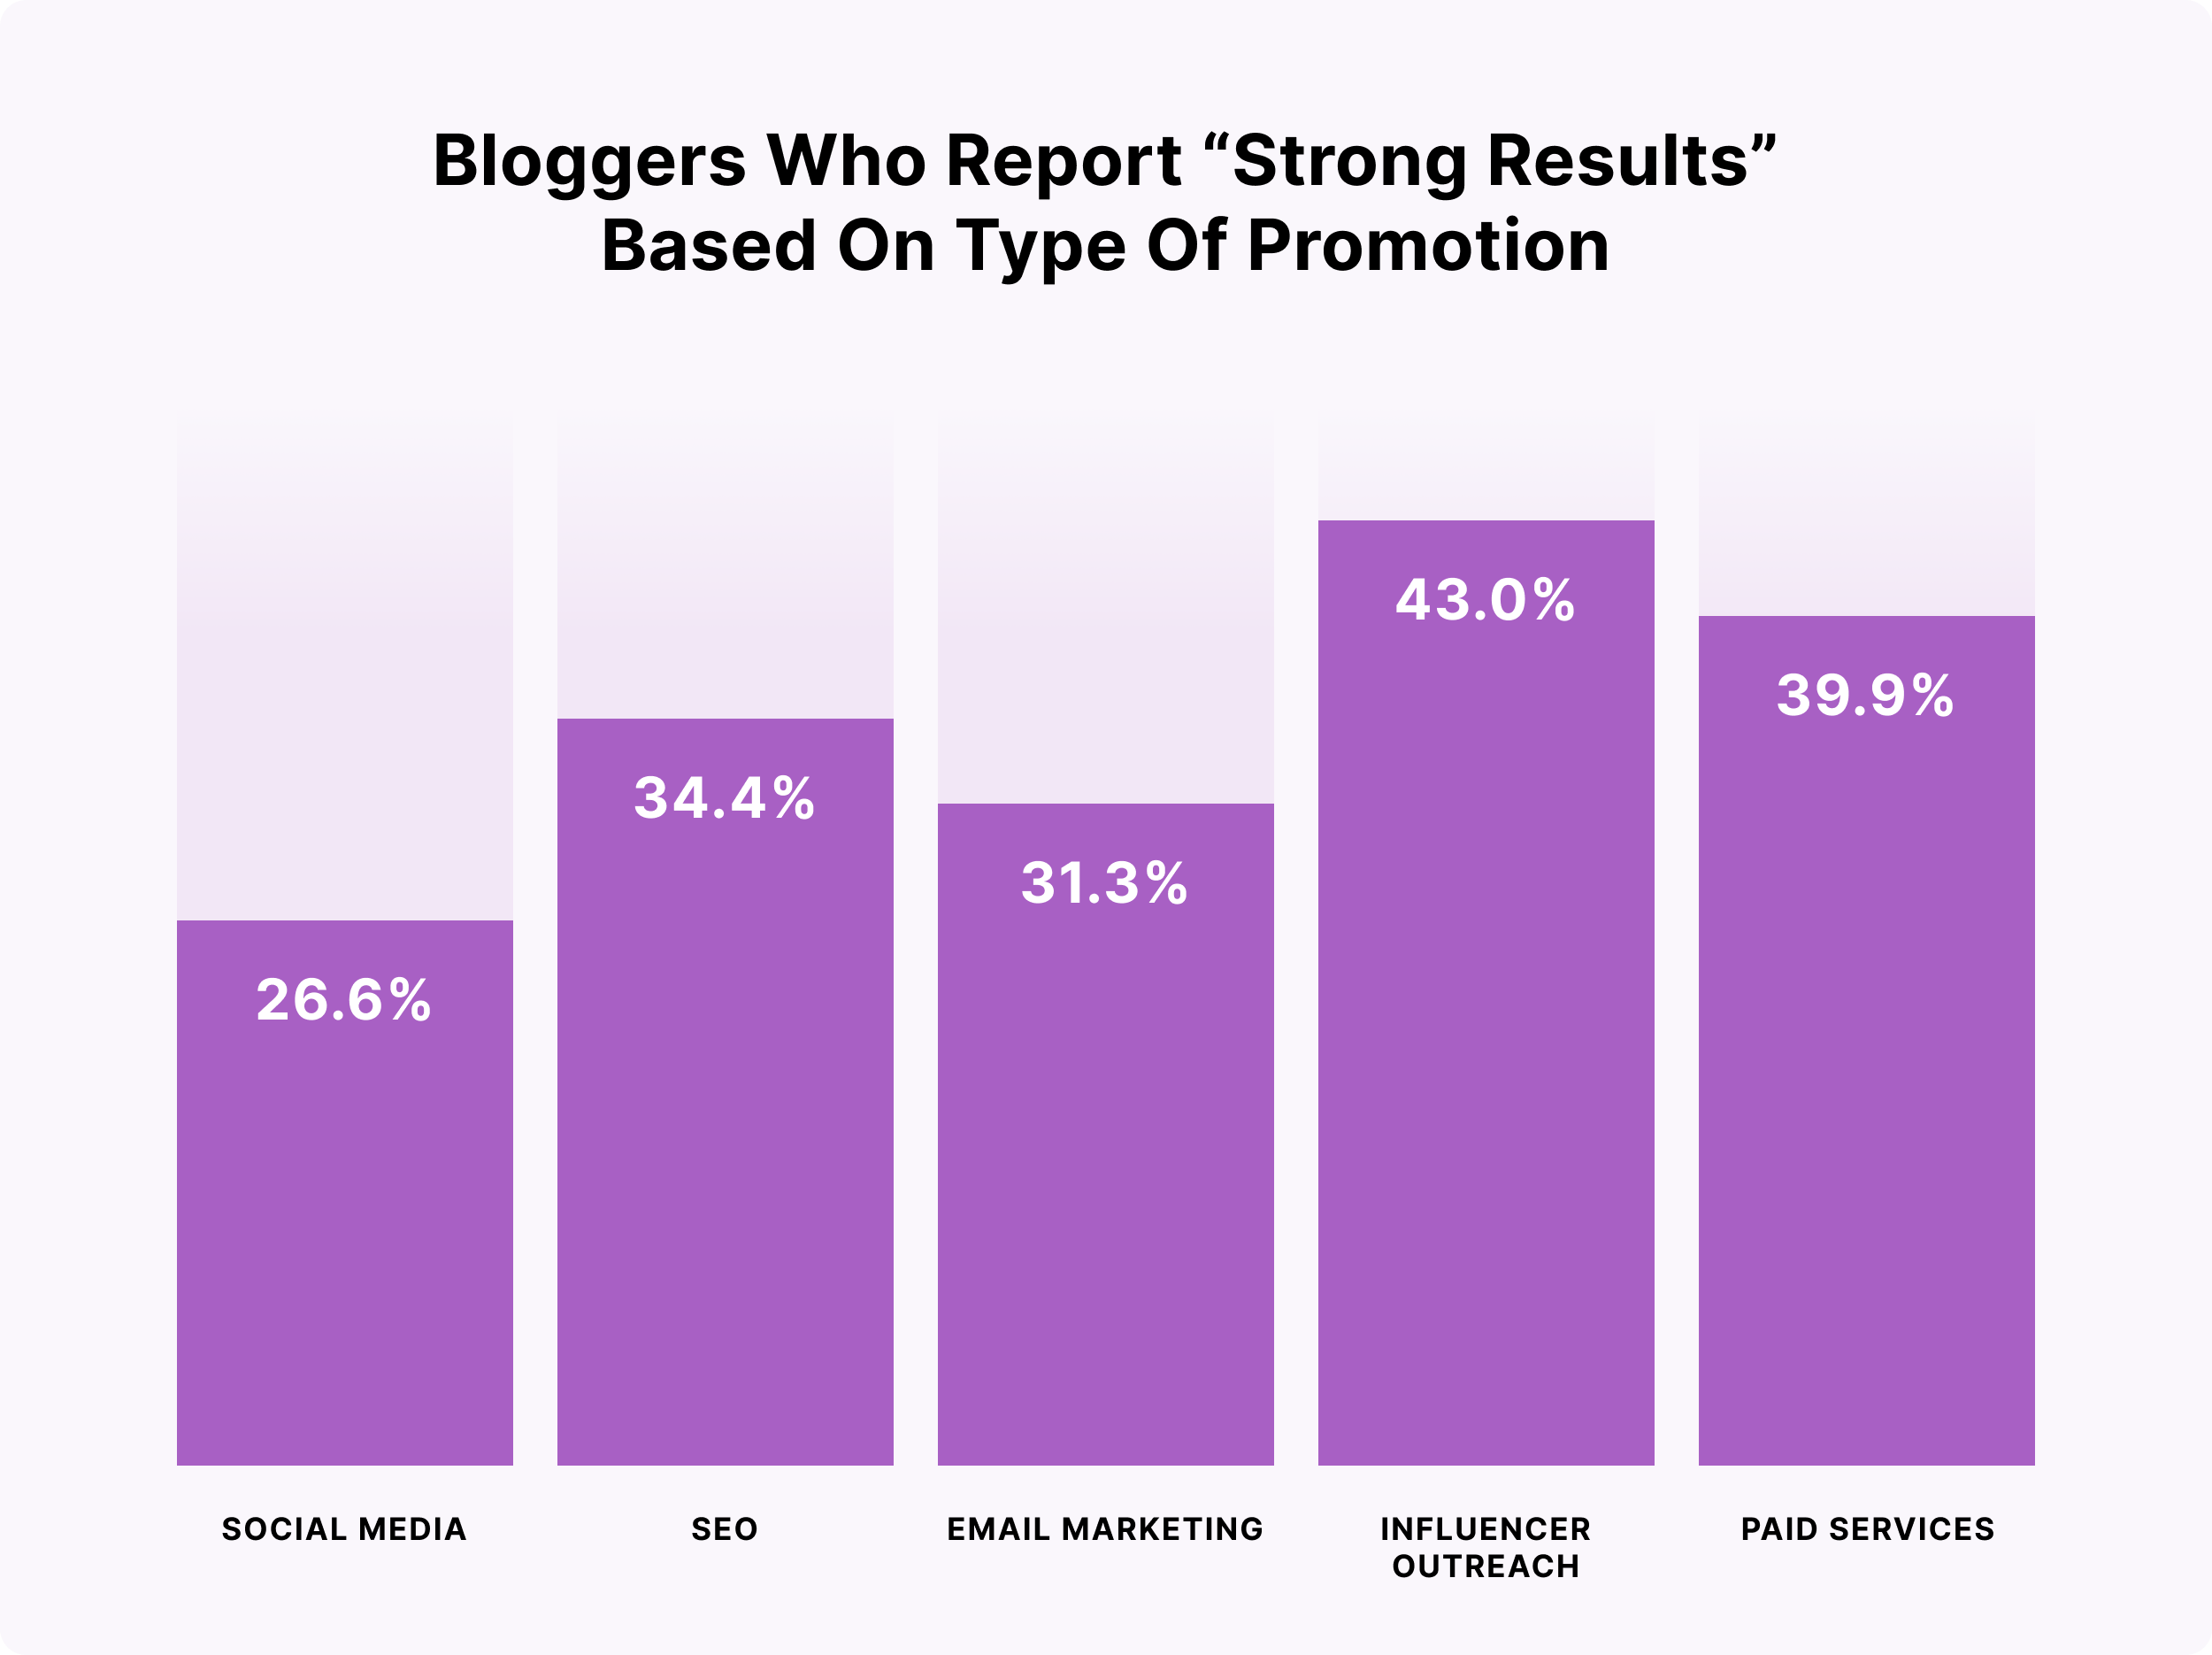 Bloggers who report strong results based on type of promotion